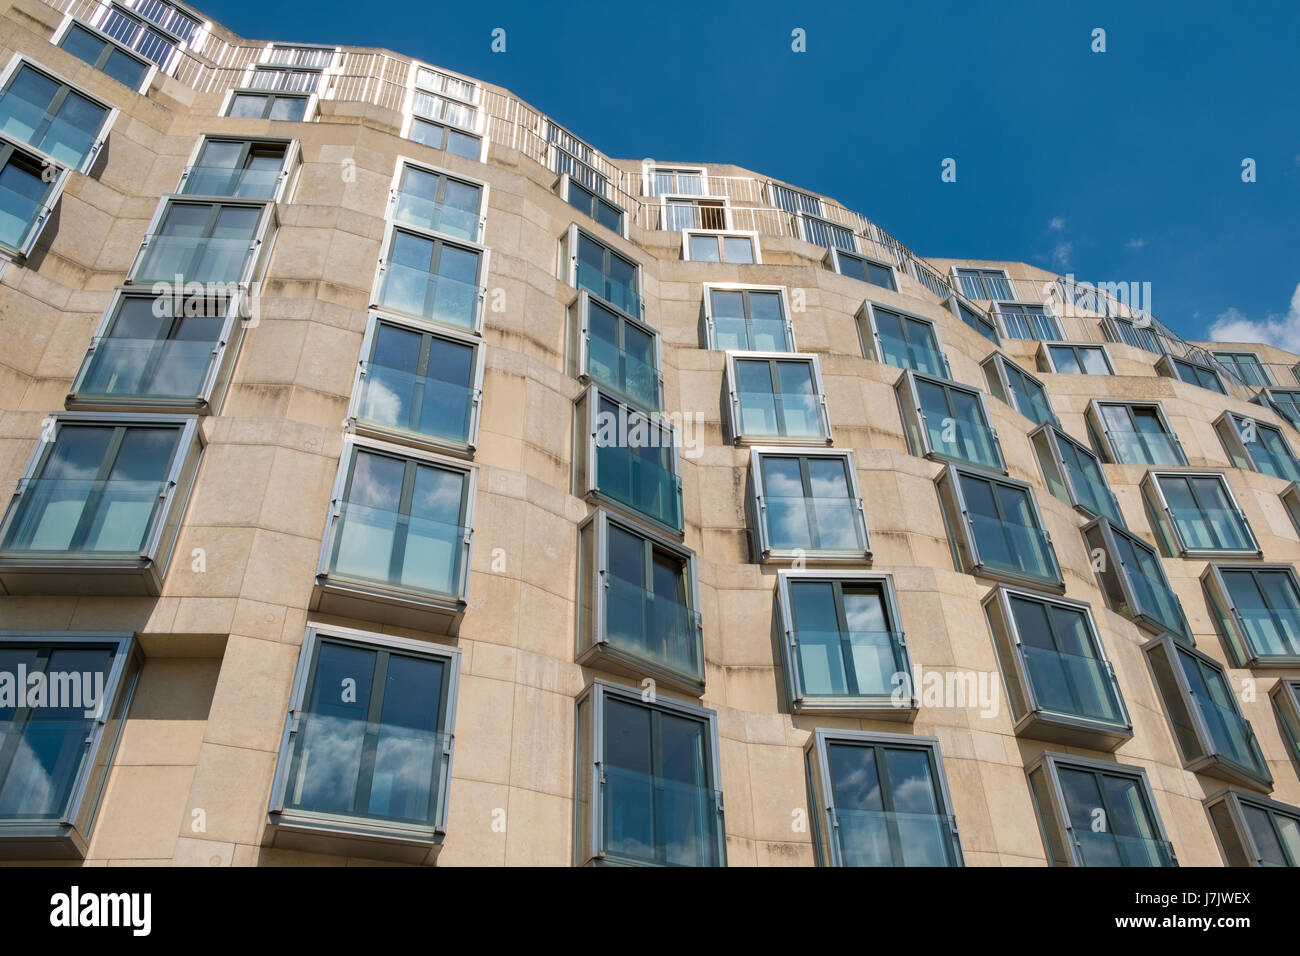 Berlin, Germany - may 23, 2017: The facade of the DZ Bank building located at Pariser Platz 3 in Berlin. It is an office, conference, and residential  Stock Photo